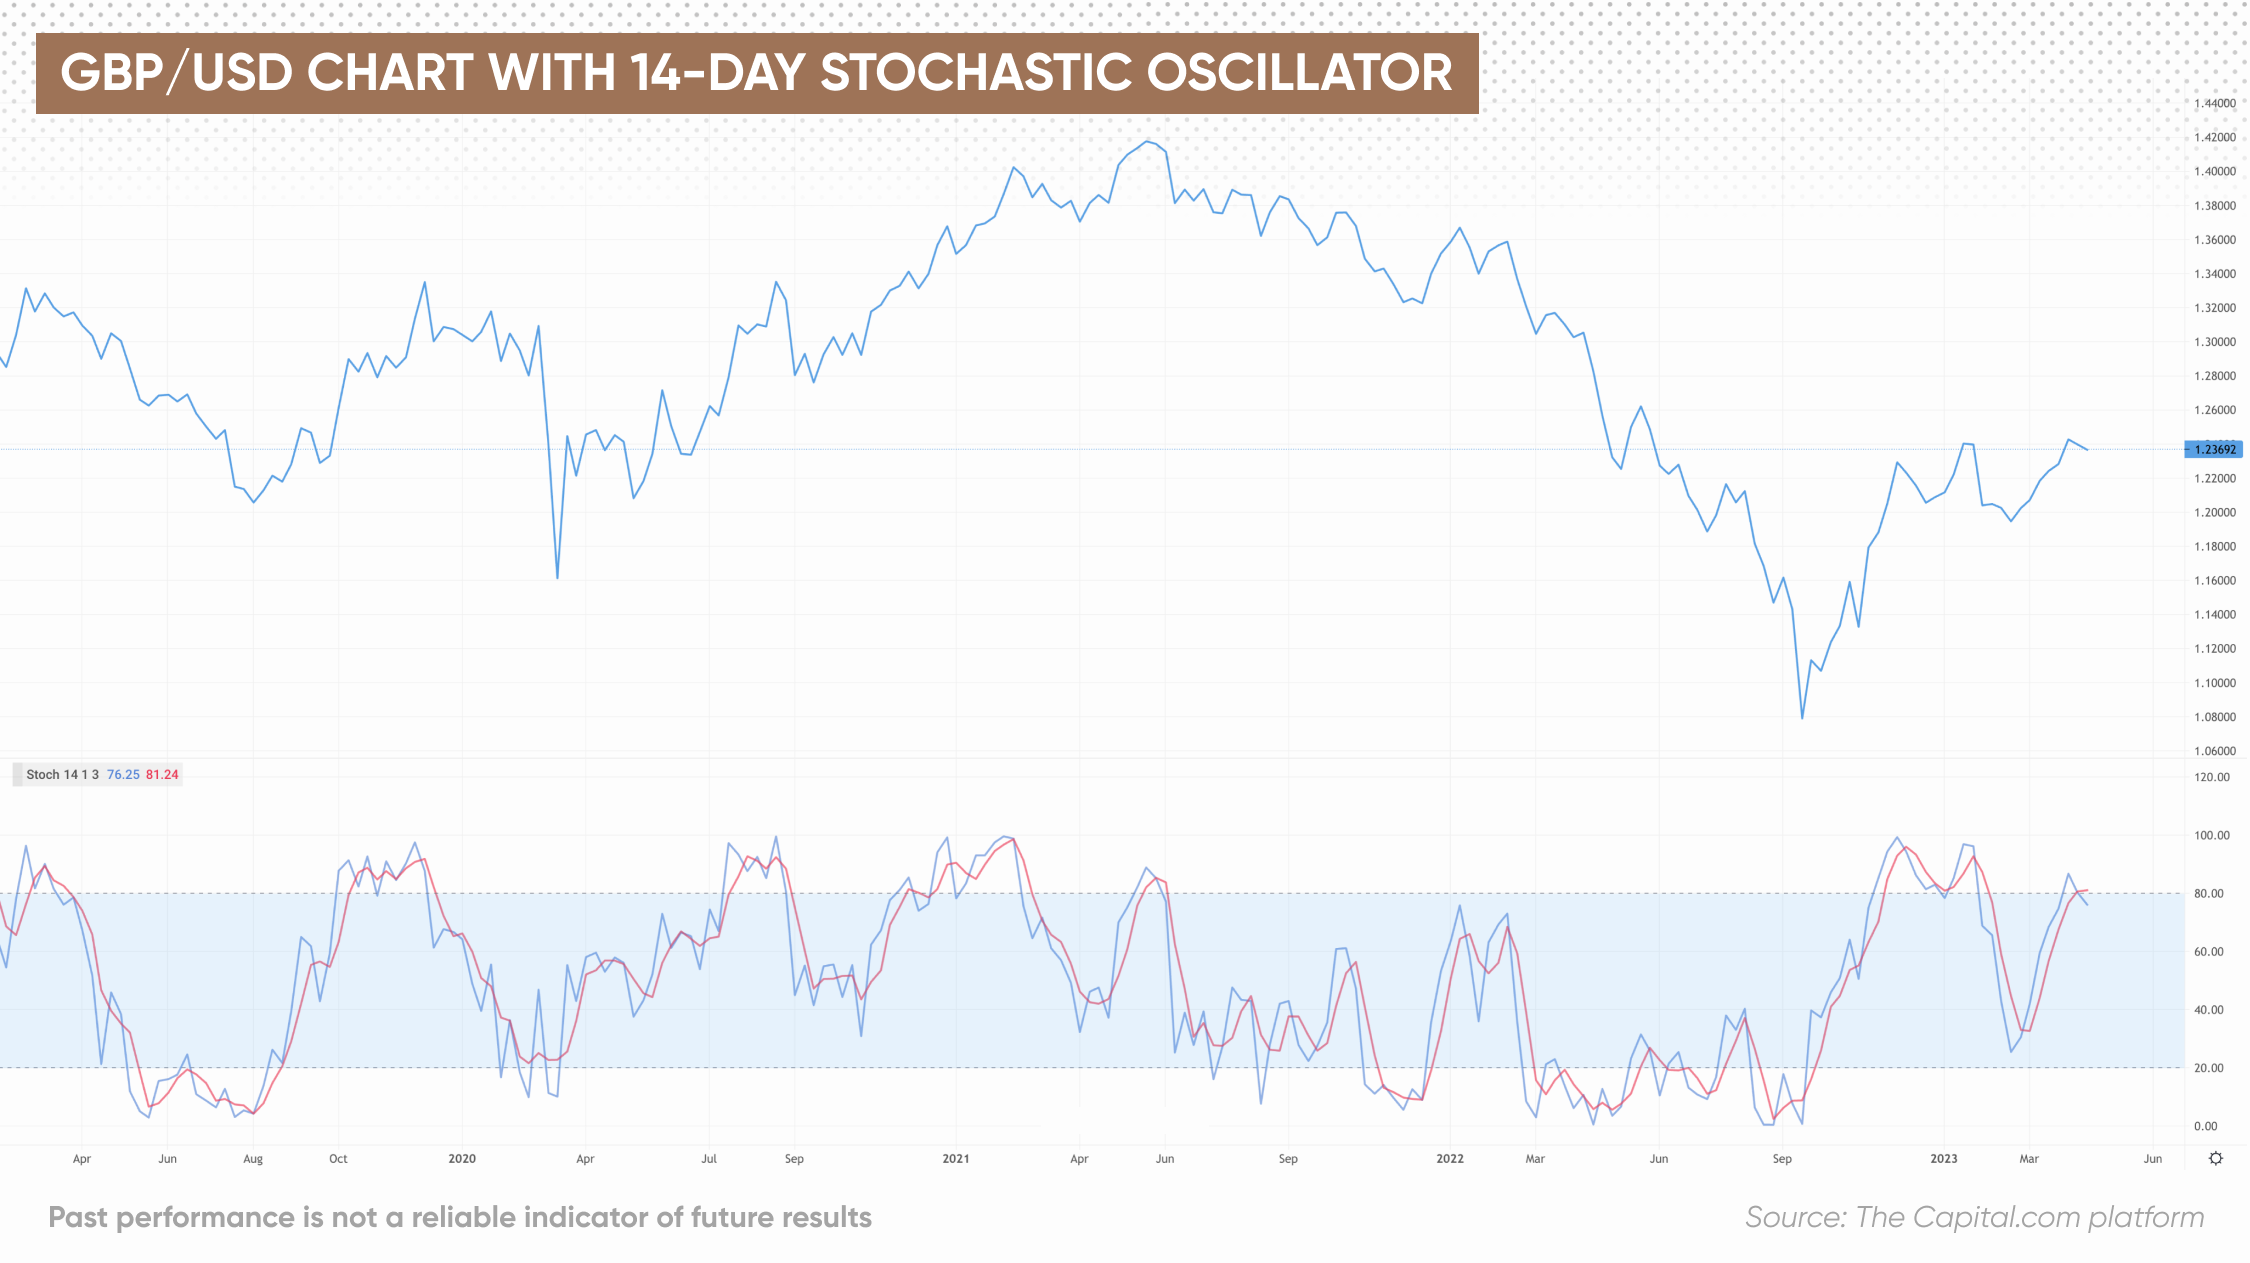 GBP/USD chart with 14-day stochastic oscillator